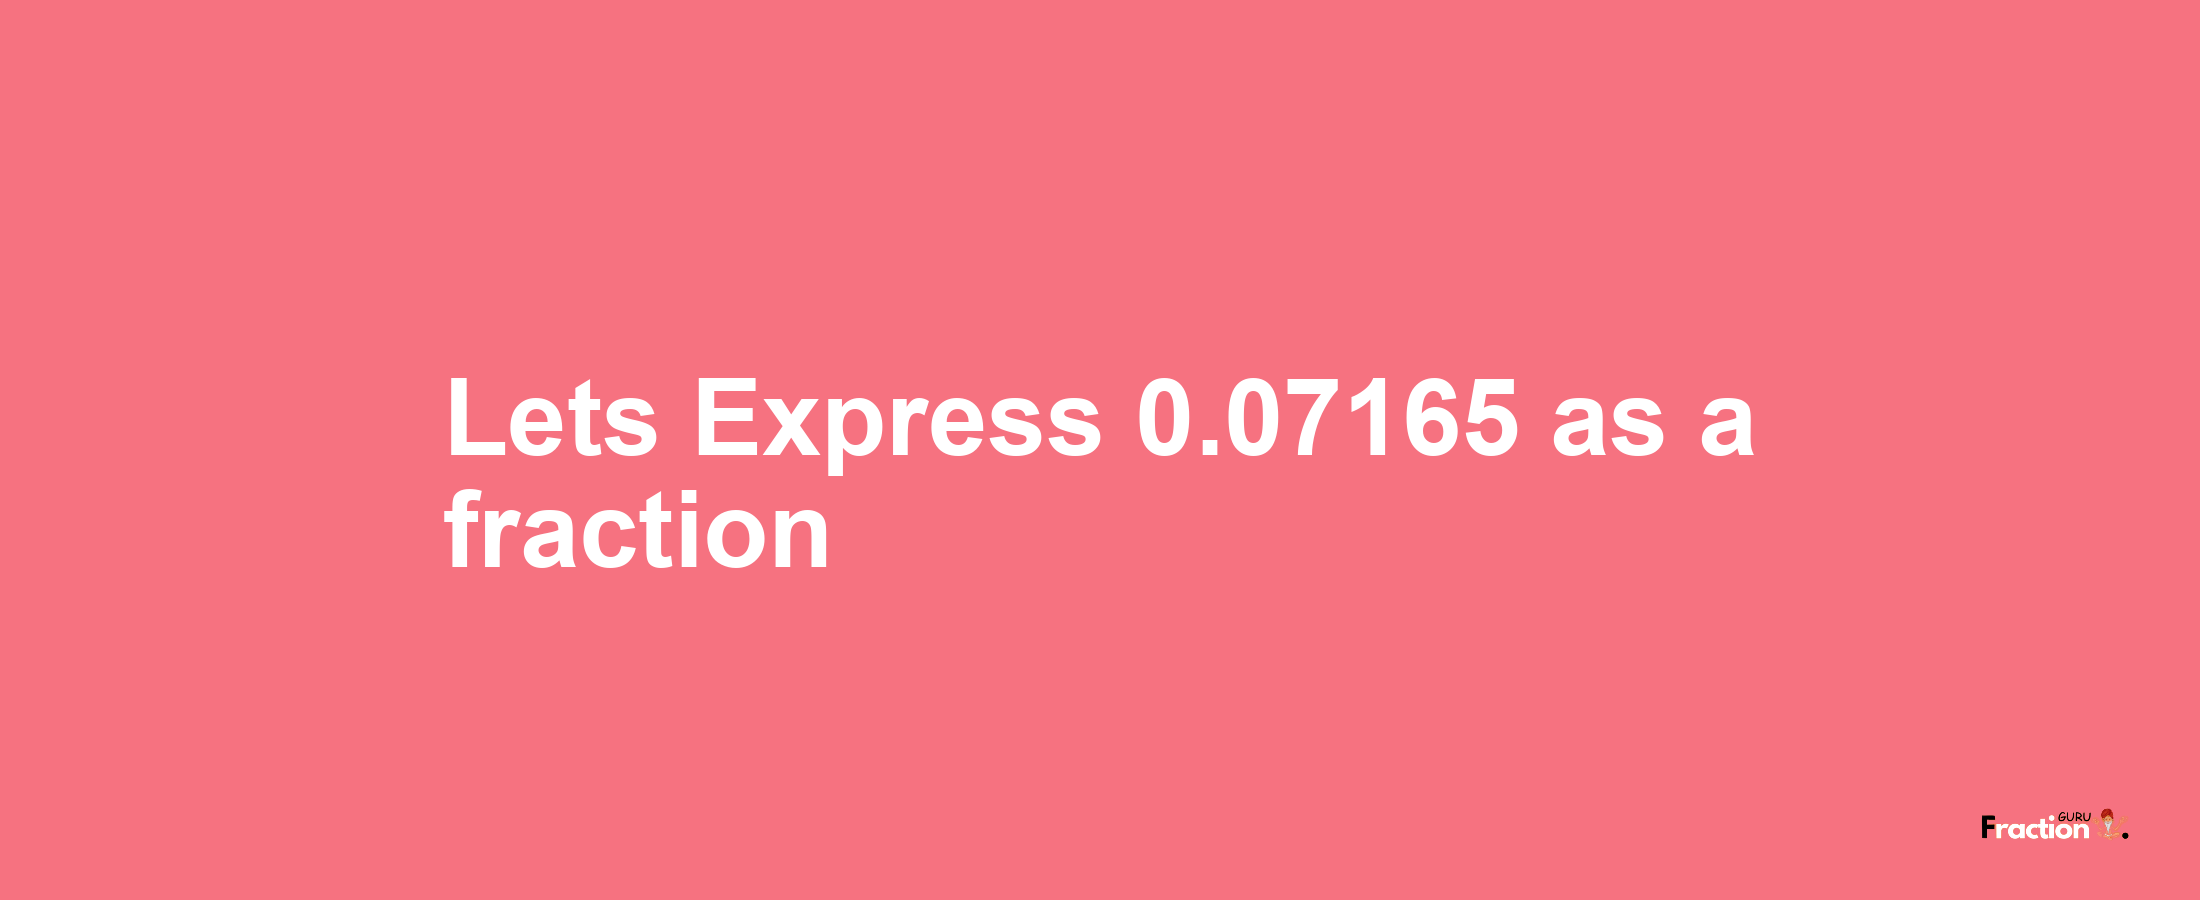 Lets Express 0.07165 as afraction